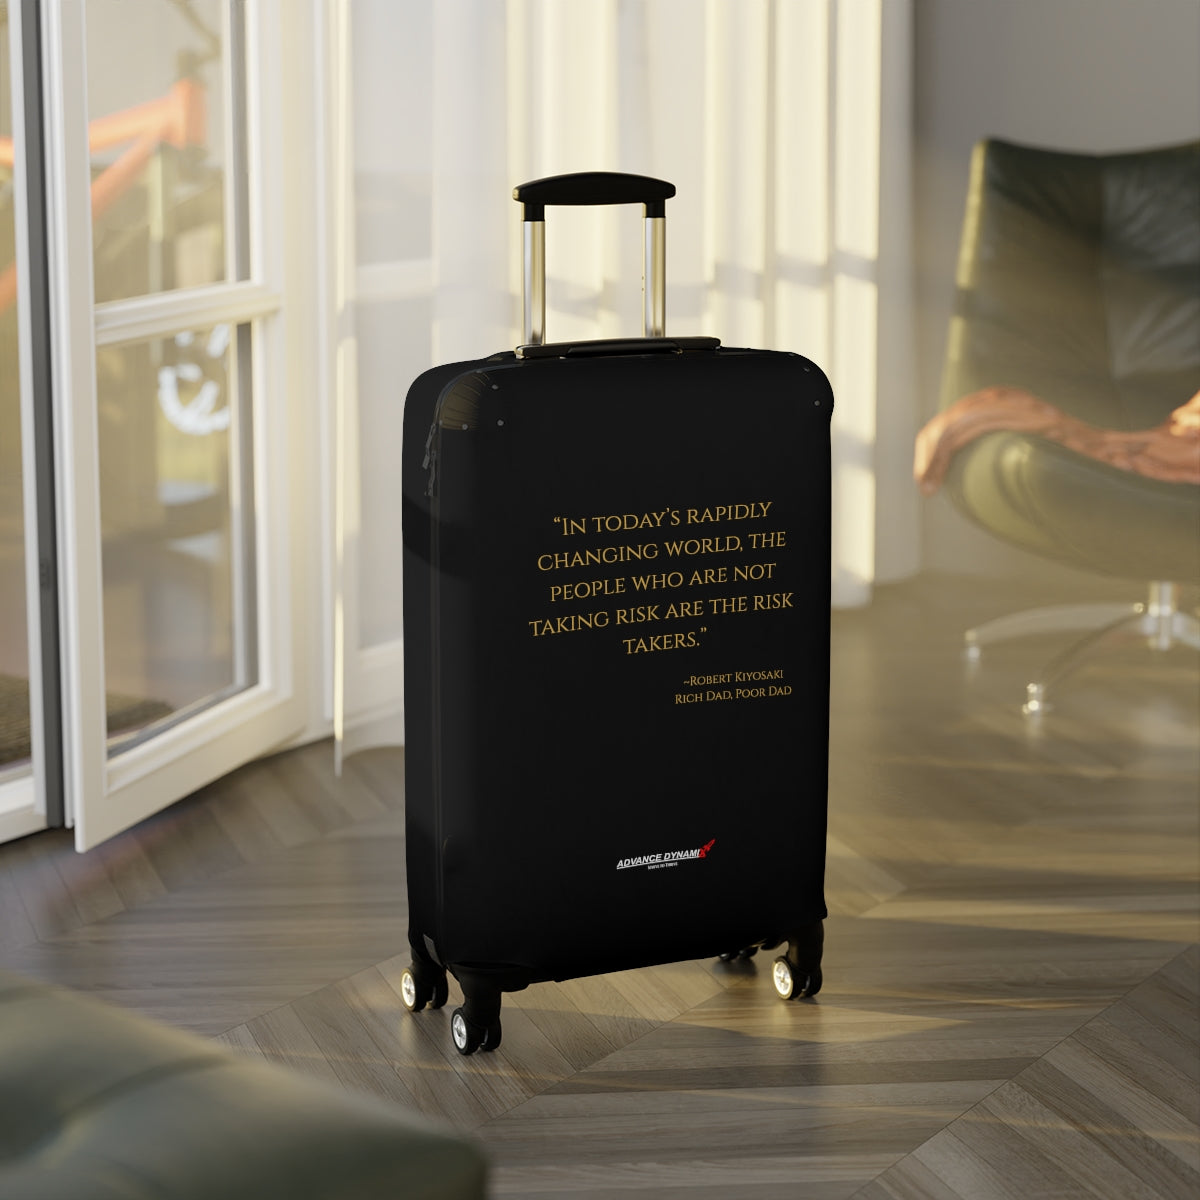 "In todays rapidly changing world, the people who are..." ~Robert Kiyosaki, Rich Dad, Poor Dad - Luggage Covers Infused with Advance Dynamix Add-A-Tude - Tell the world!